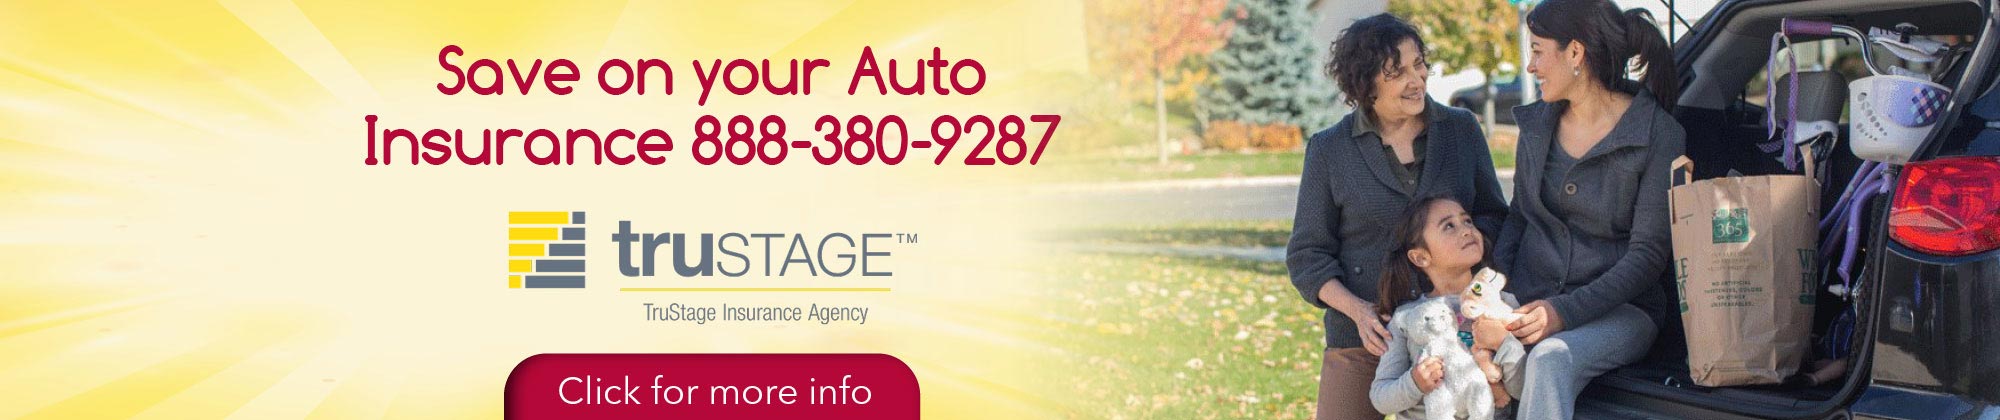 Save on your auto insurance 888-380-9287.